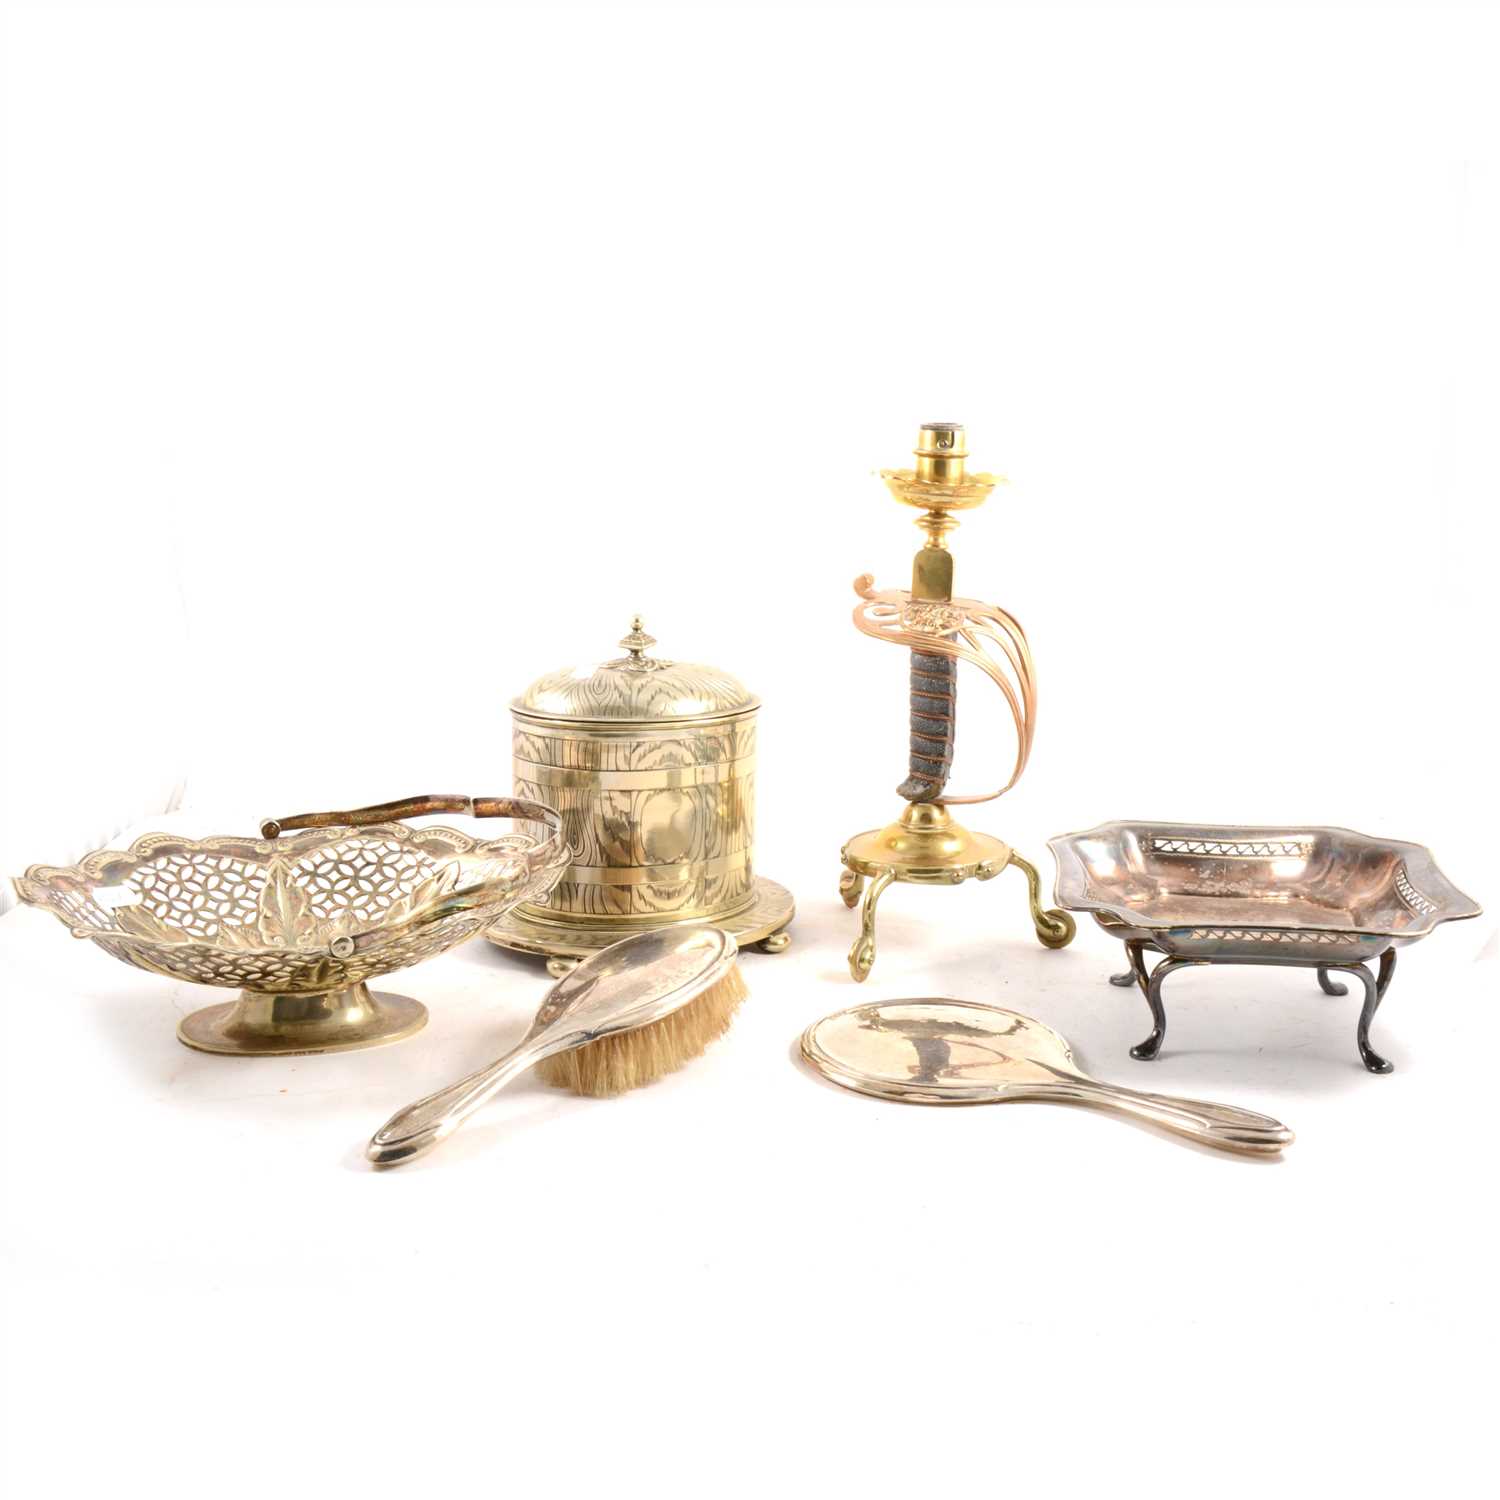 Lot 140 - Sword-hilt candlestick, plated biscuit barrel and other silver and plated wares